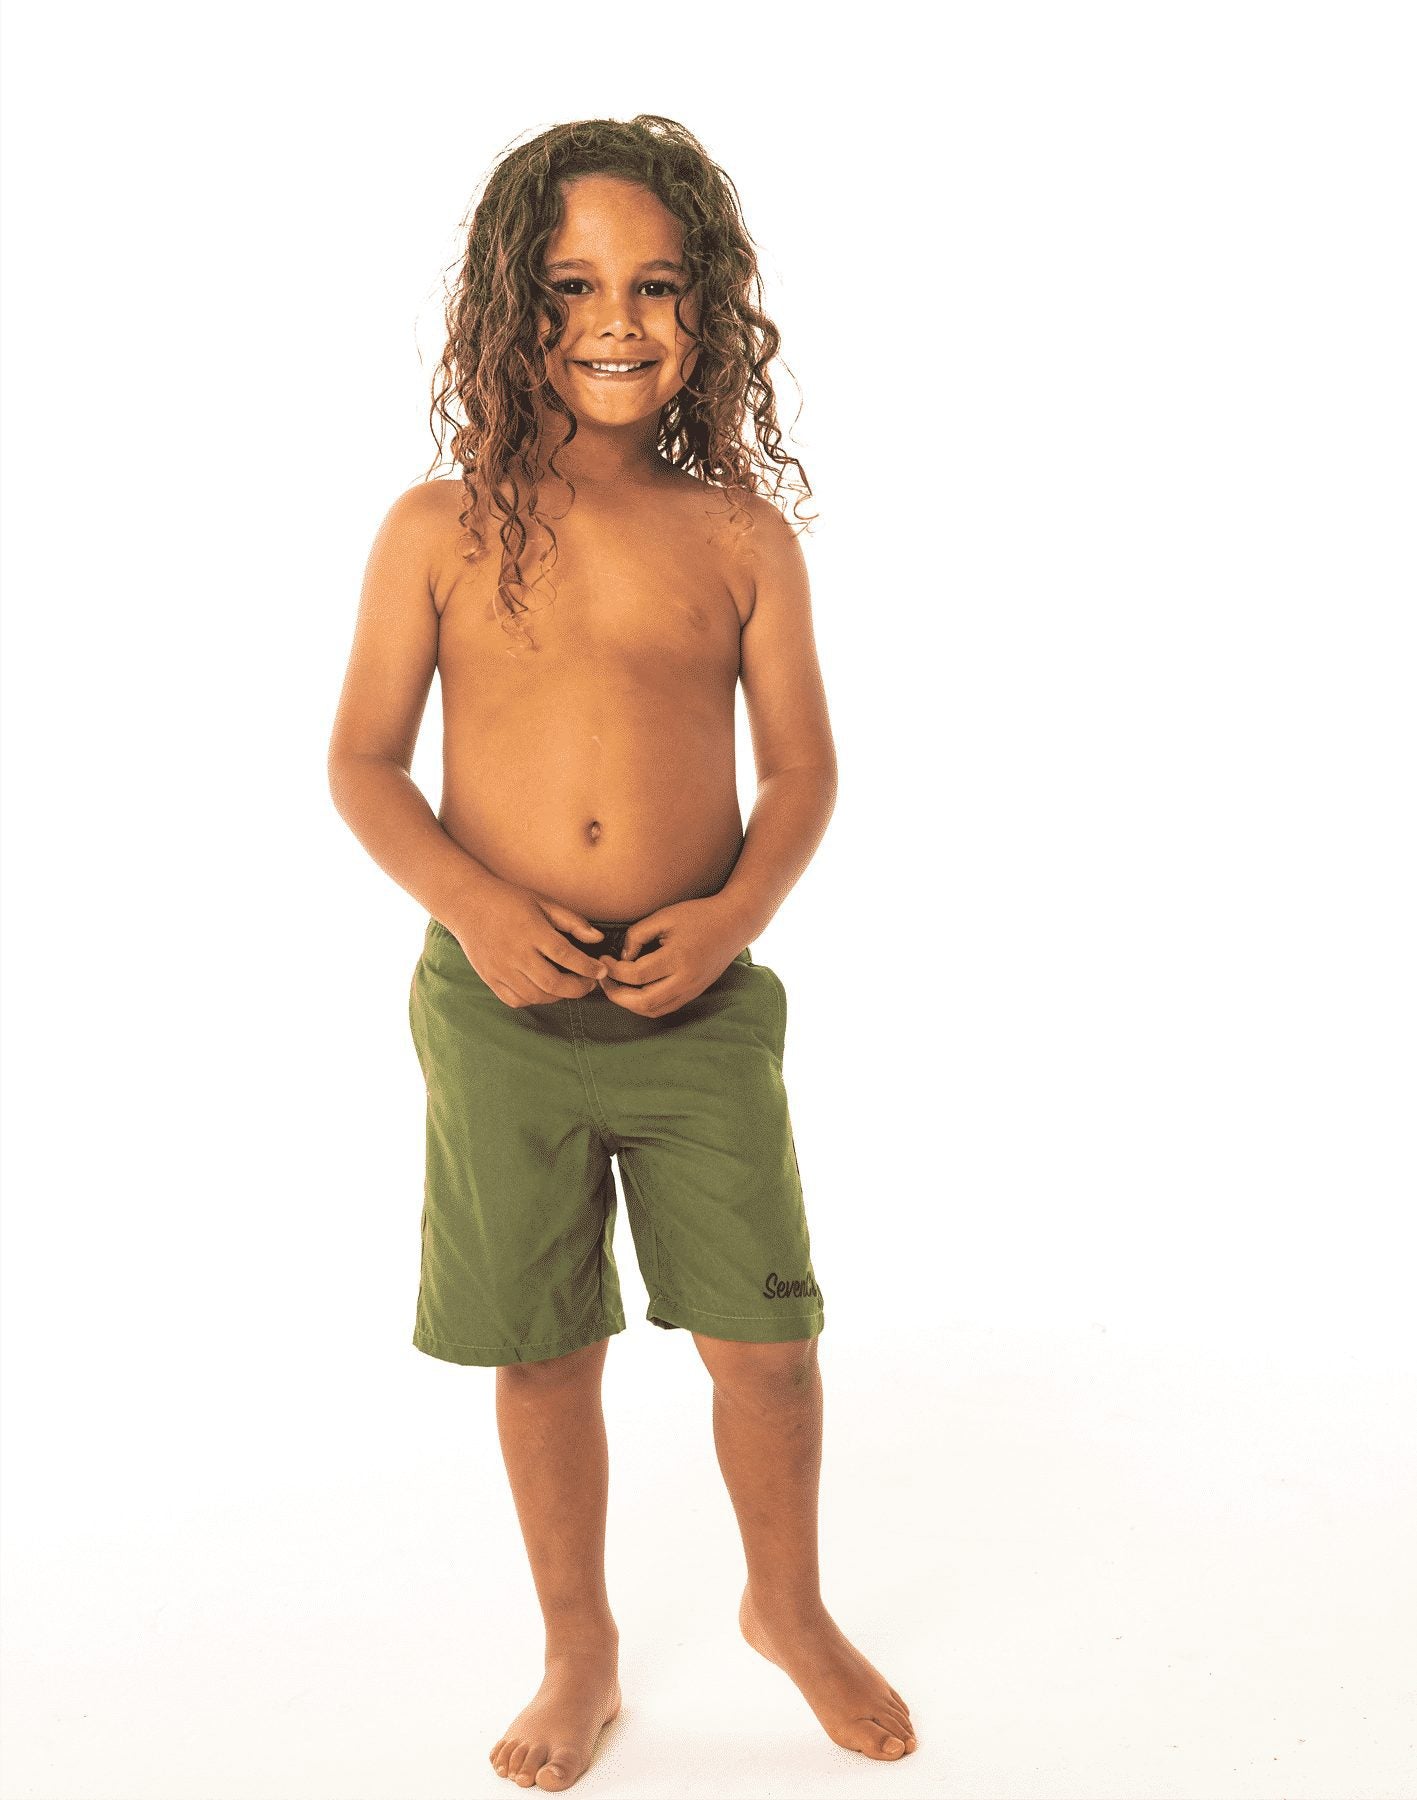  SevenC's Kids' Recycled Polyester Shorts in Olive - Full view on model